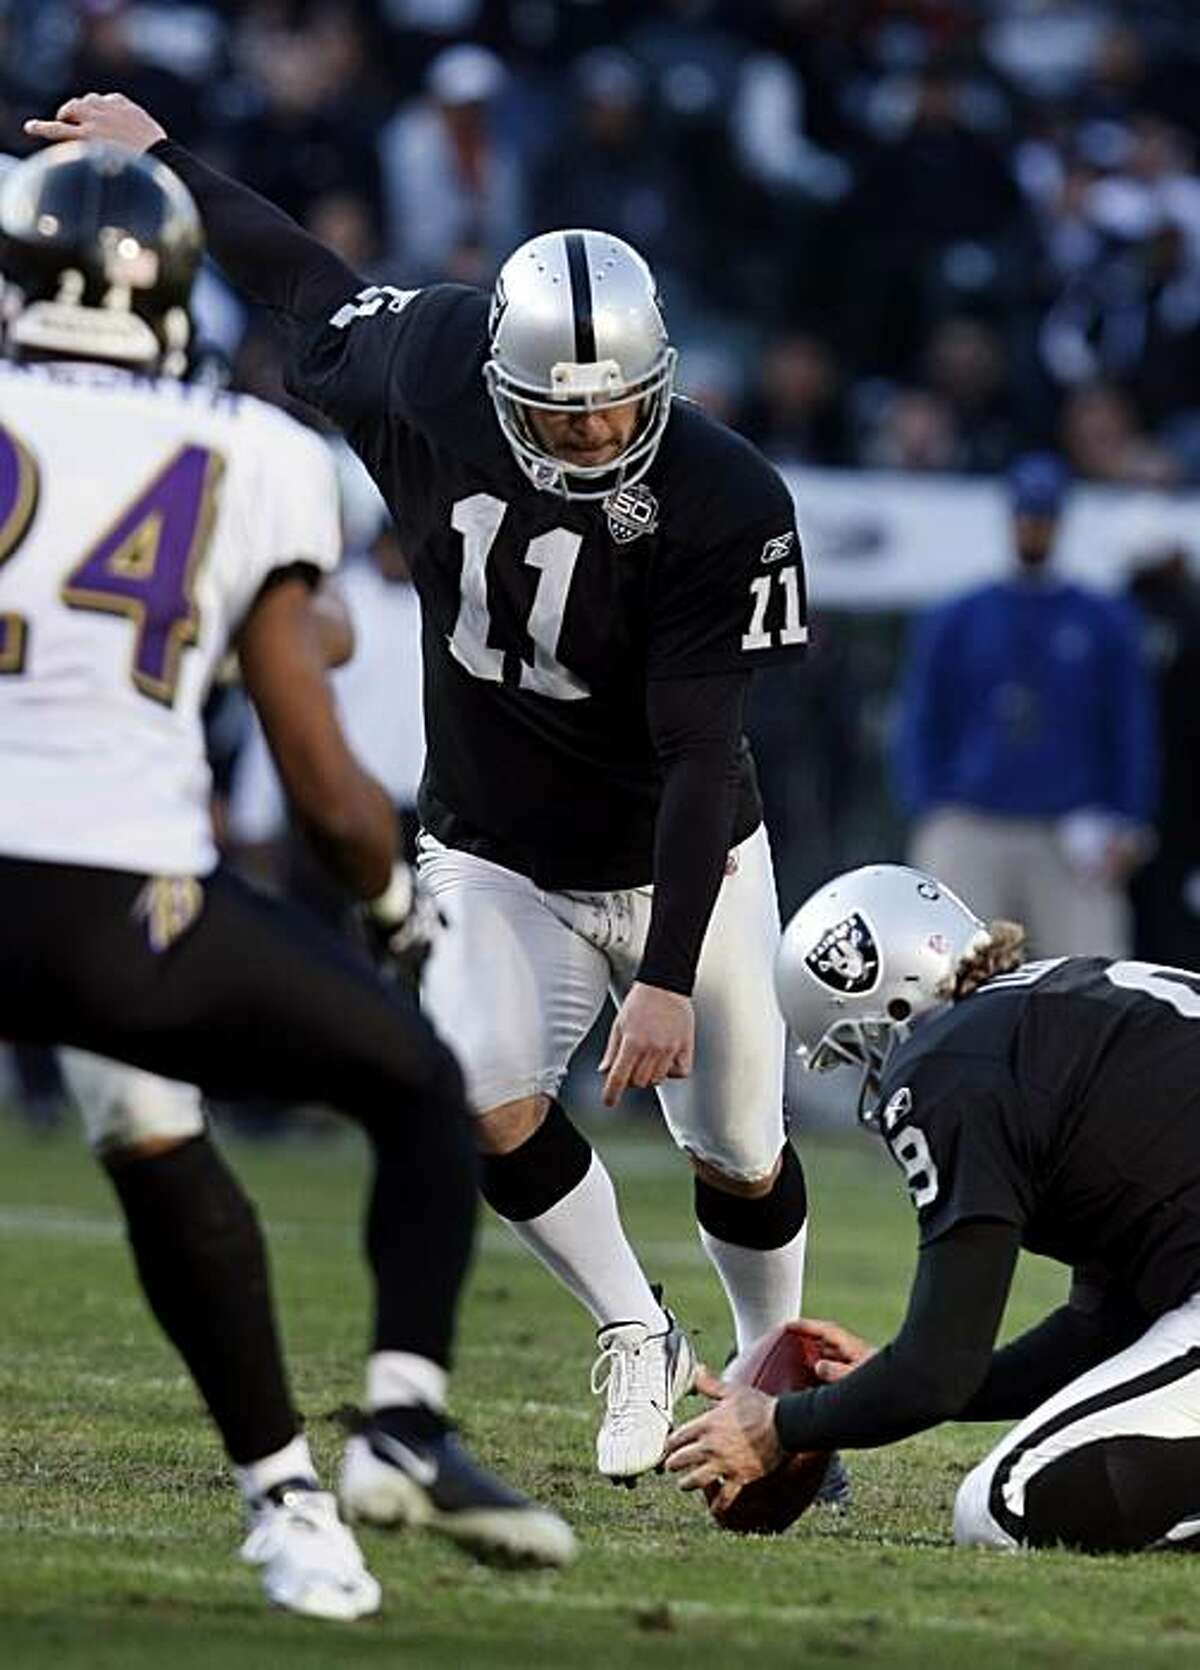 Oakland Raiders kicker Sebastian Janikowski kicks a field goaled against the Baltimore Ravens, Sunday Jan.3, 2010, in Oakland, Calif. This was the 1000 point record that Janikowski hit while playing for the Raiders.